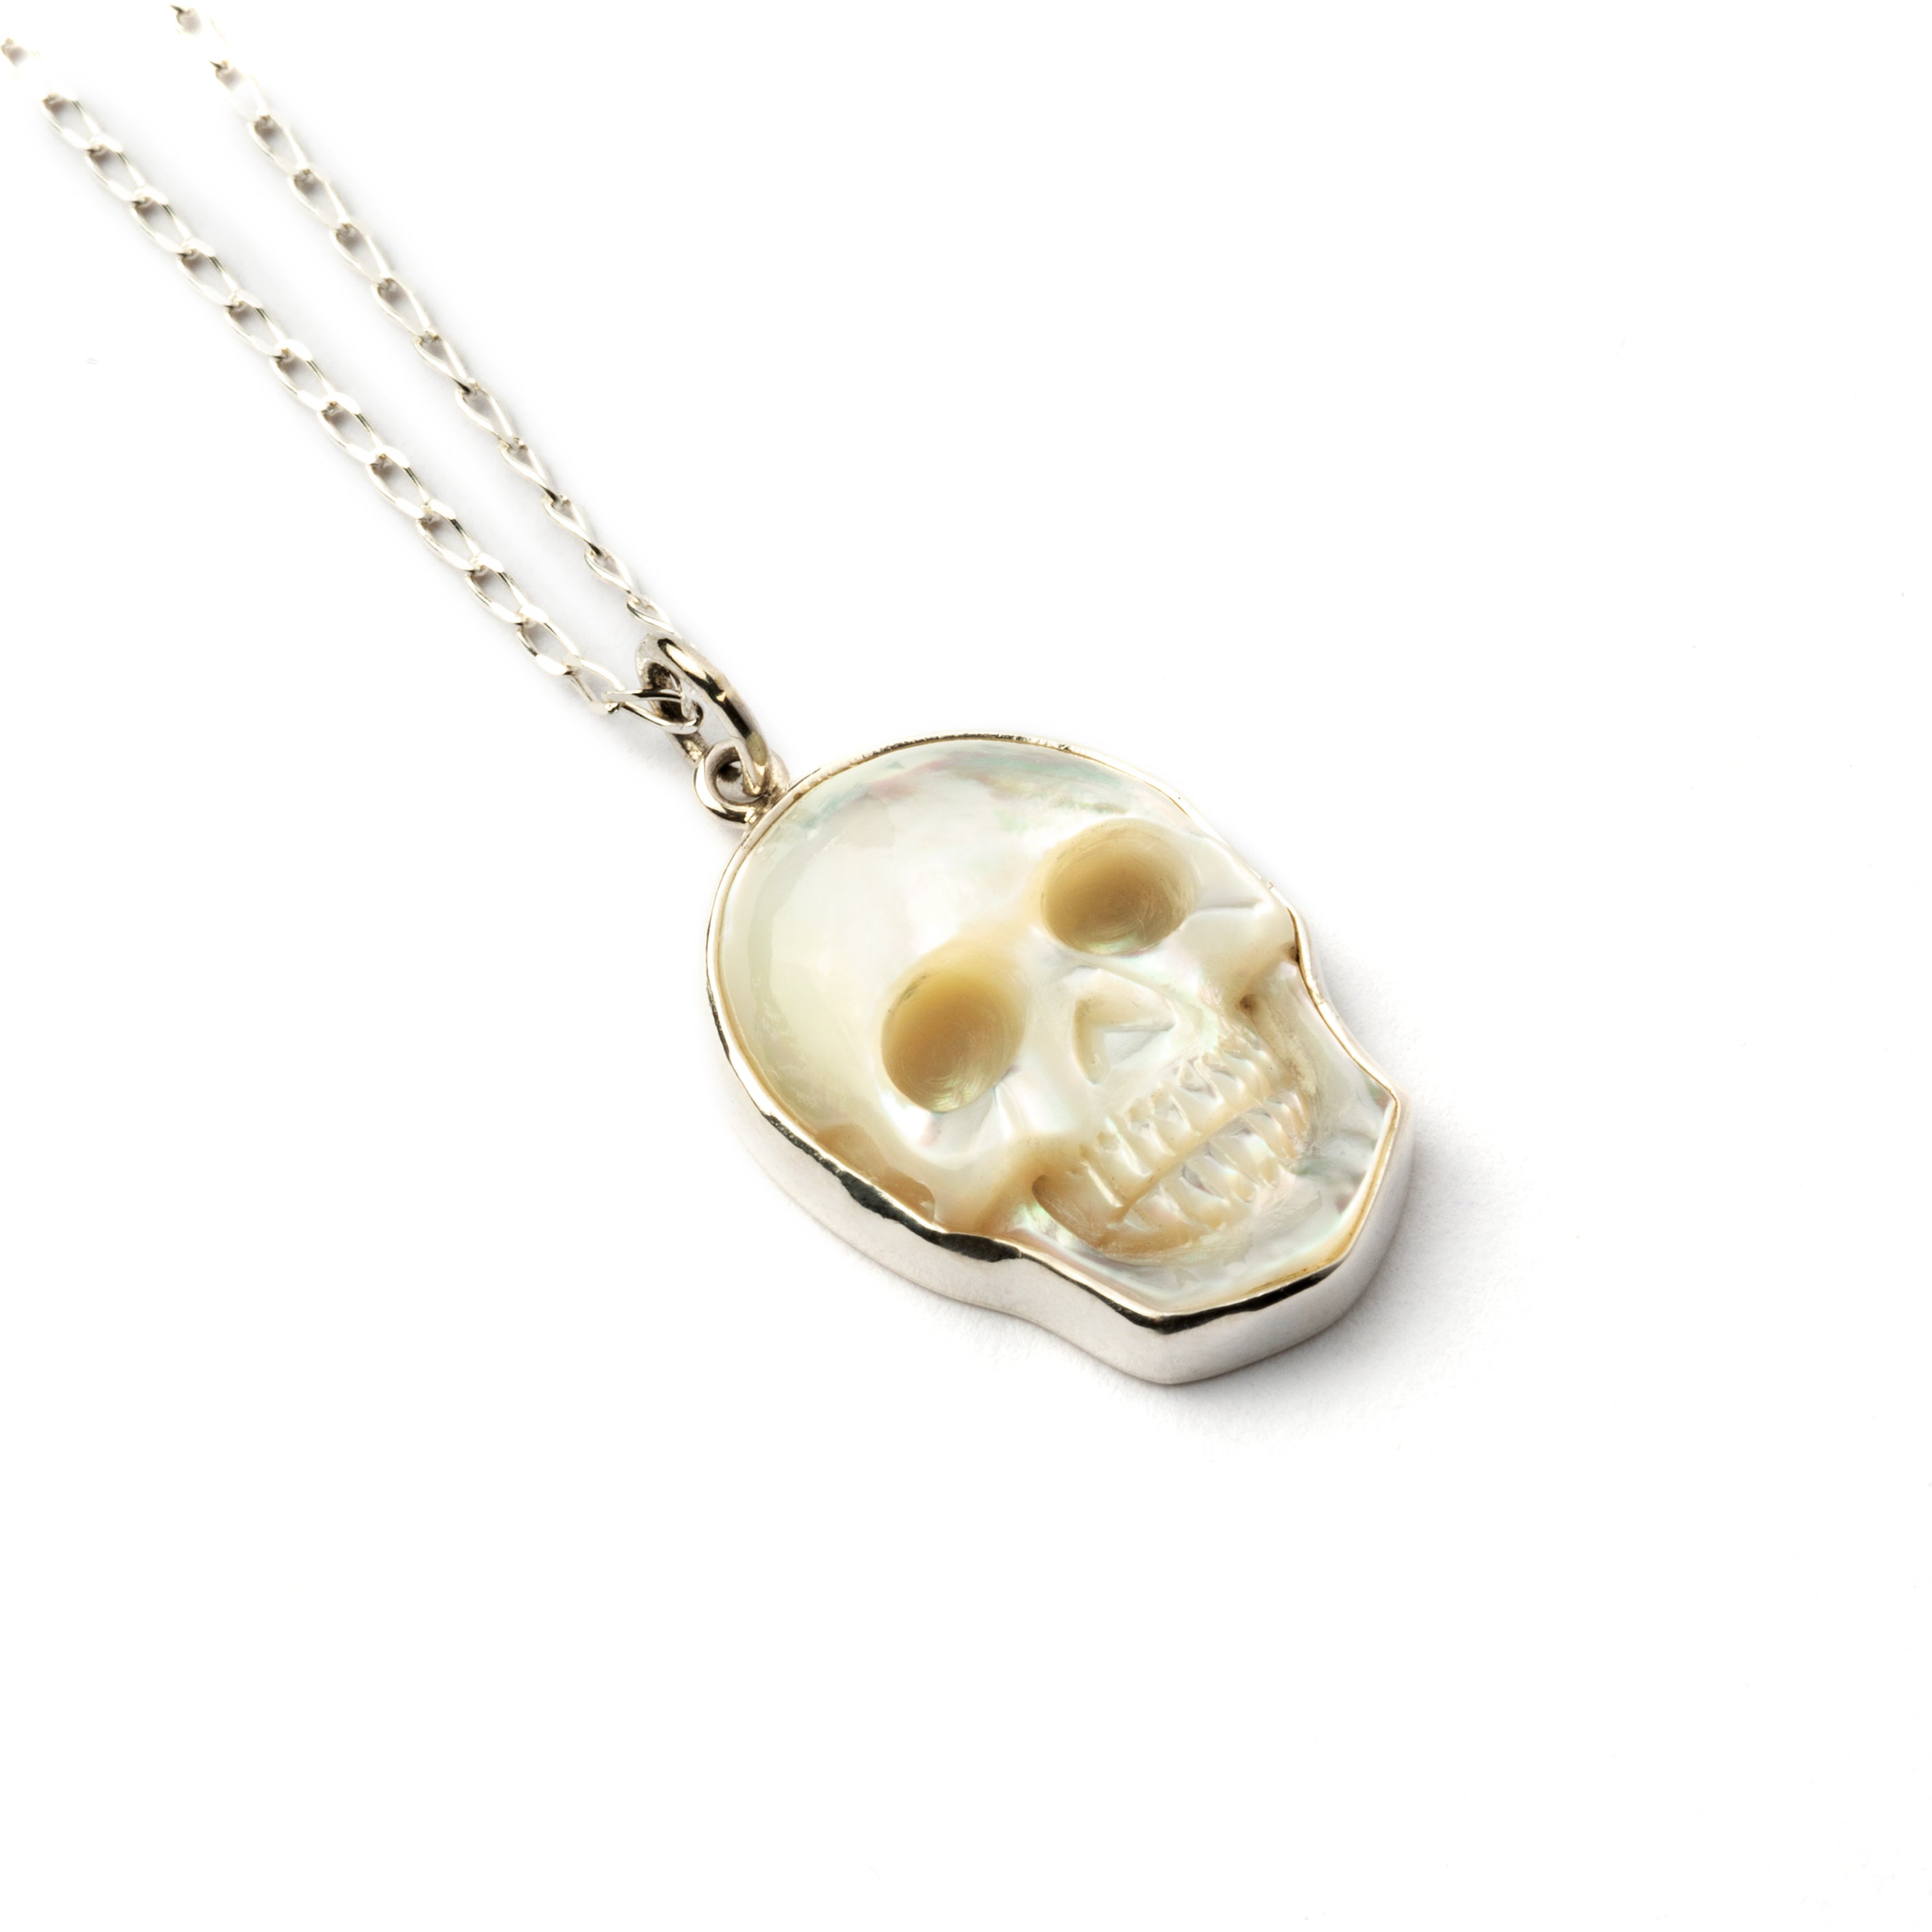 Mother of Pearl Skull Necklace left side view